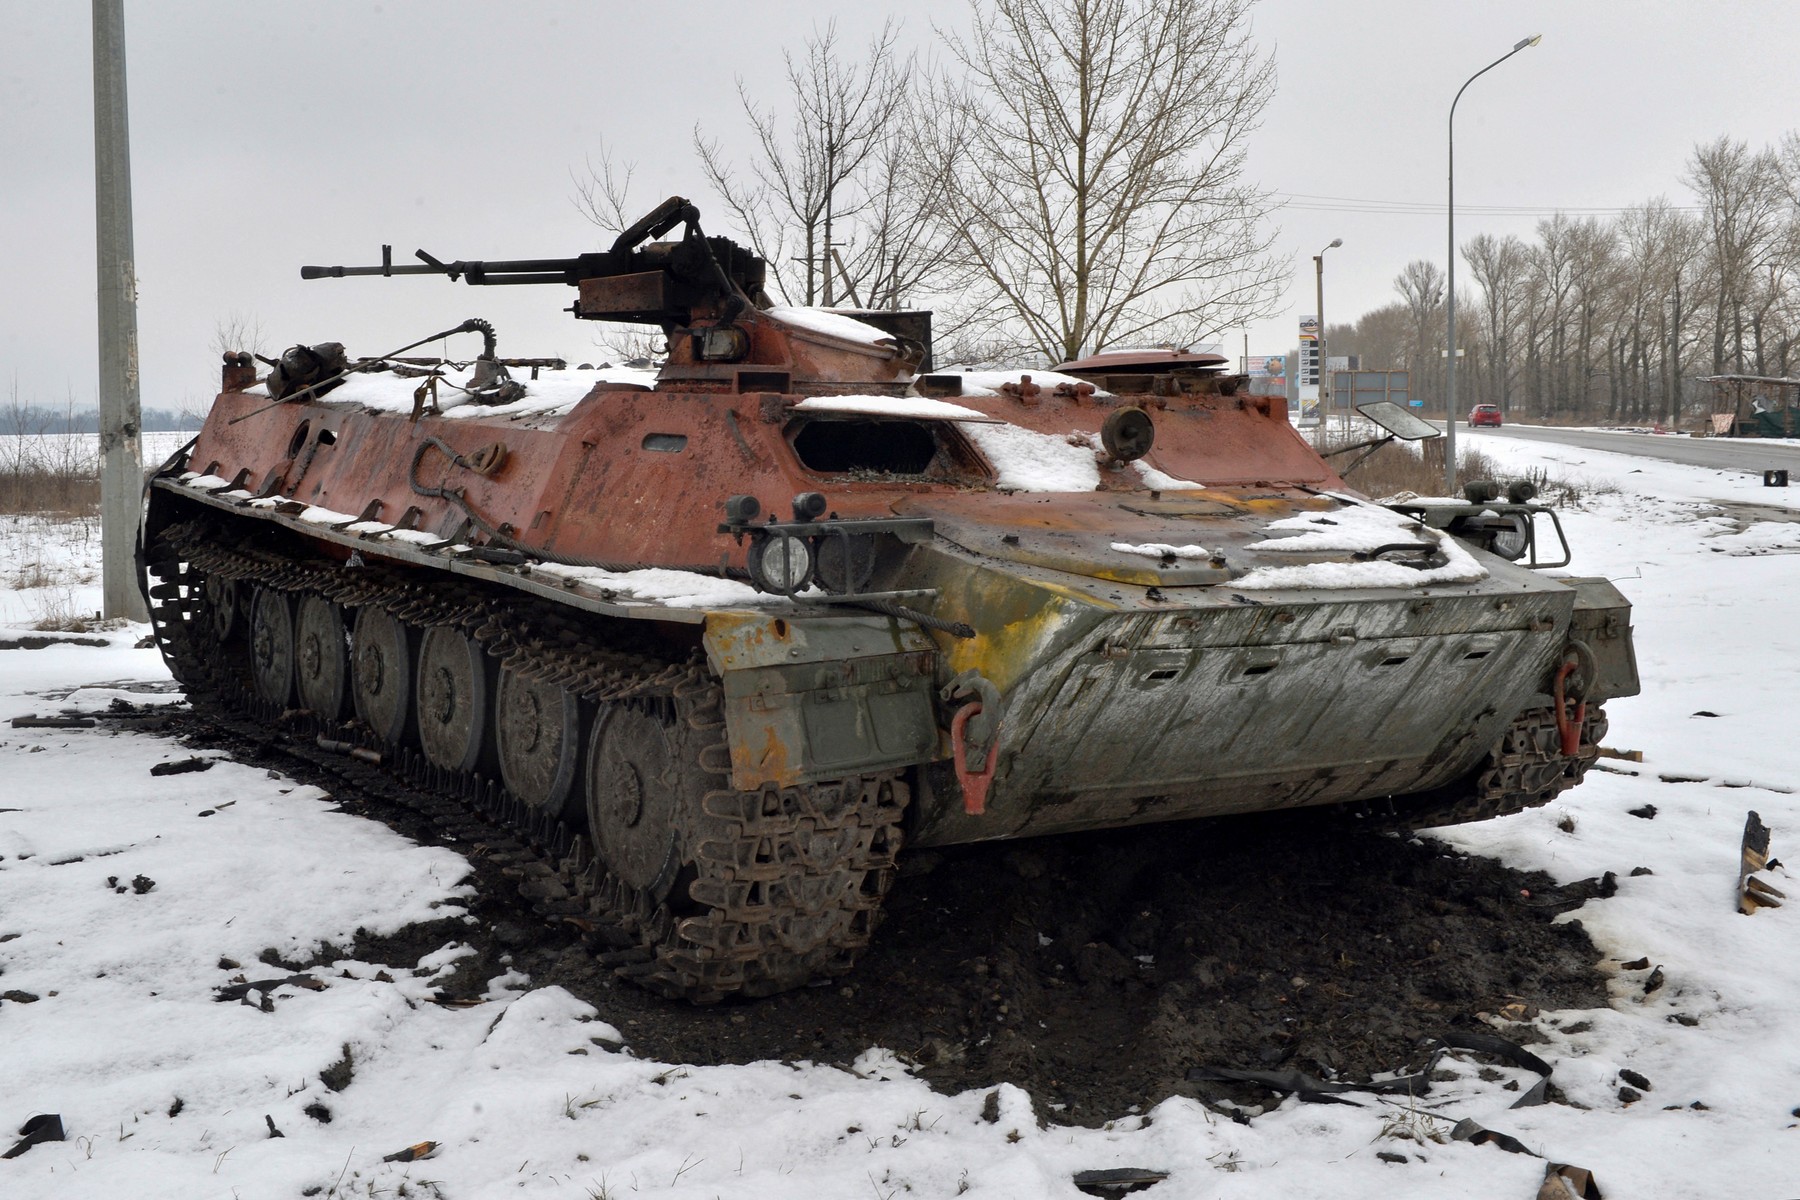 A destroyed Russian military vehicle is seen on the roadside on the outskirts of Kharkiv on February 26, 2022, following the Russian invasion of Ukraine. Ukrainian forces repulsed a Russian attack on Kyiv but 